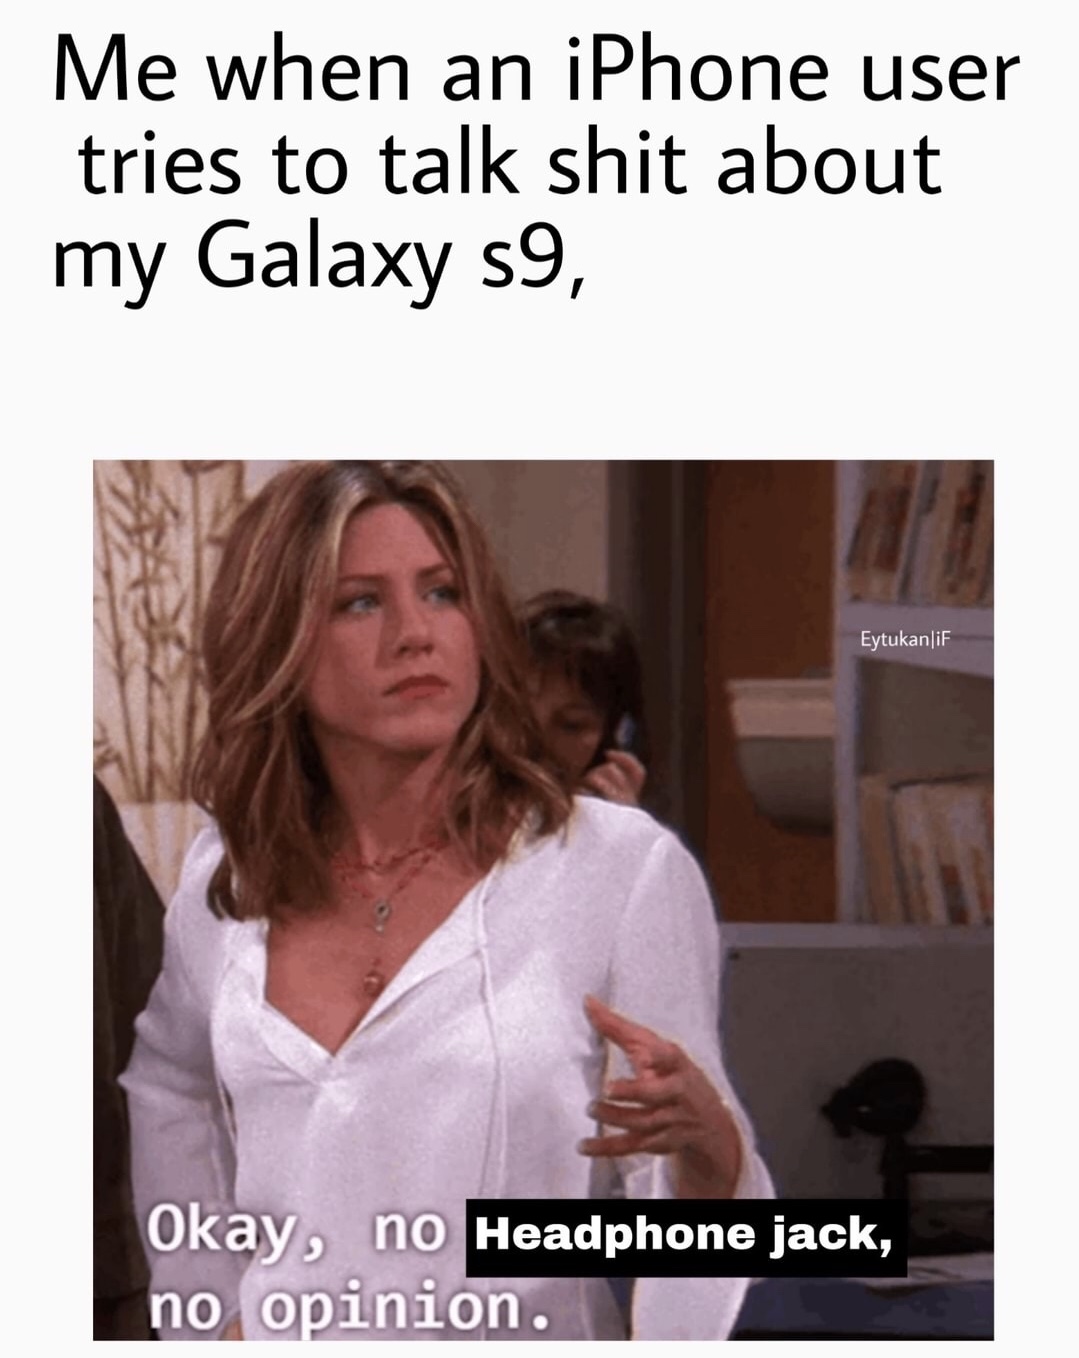 memes - no uterus no opinion - Me when an iPhone user tries to talk shit about my Galaxy S9, Eytukanlif Okay, no Headphone jack, no opinion.